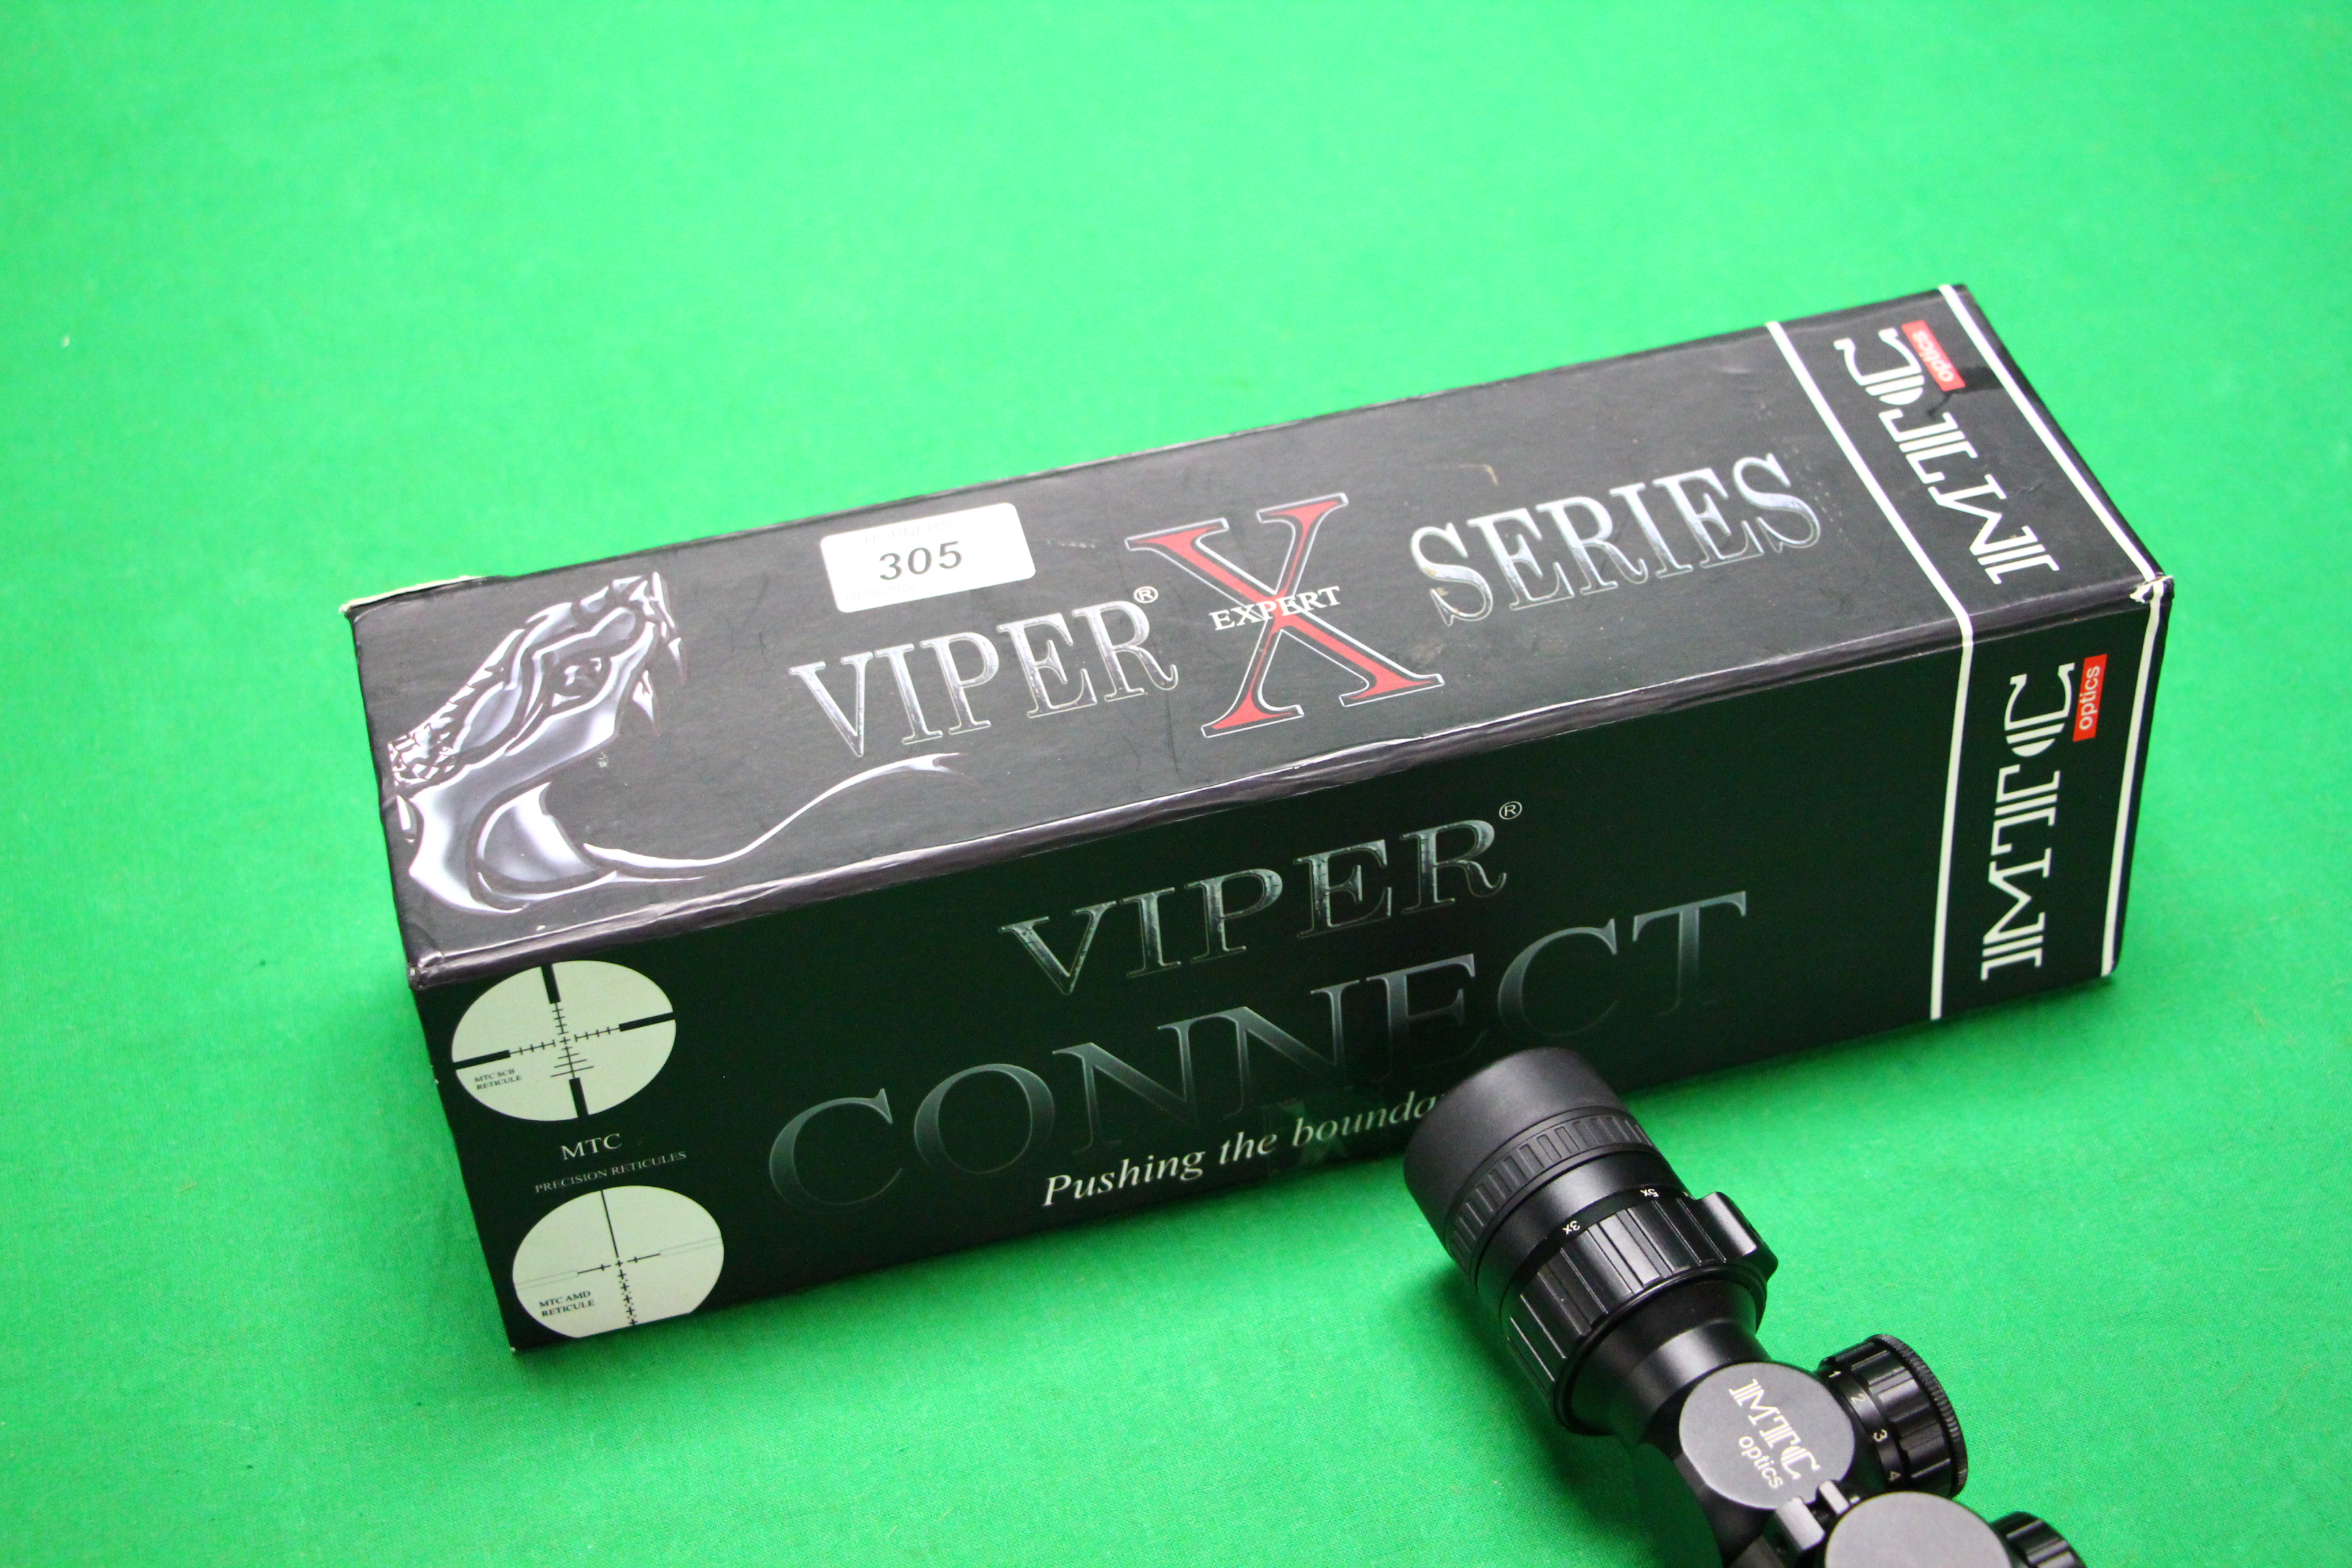 A BOXED MTC OPTICS VIPER X SERIES CONNECT 3-12 X32 RIFLE SCOPE WITH MOUNTS - Image 9 of 10